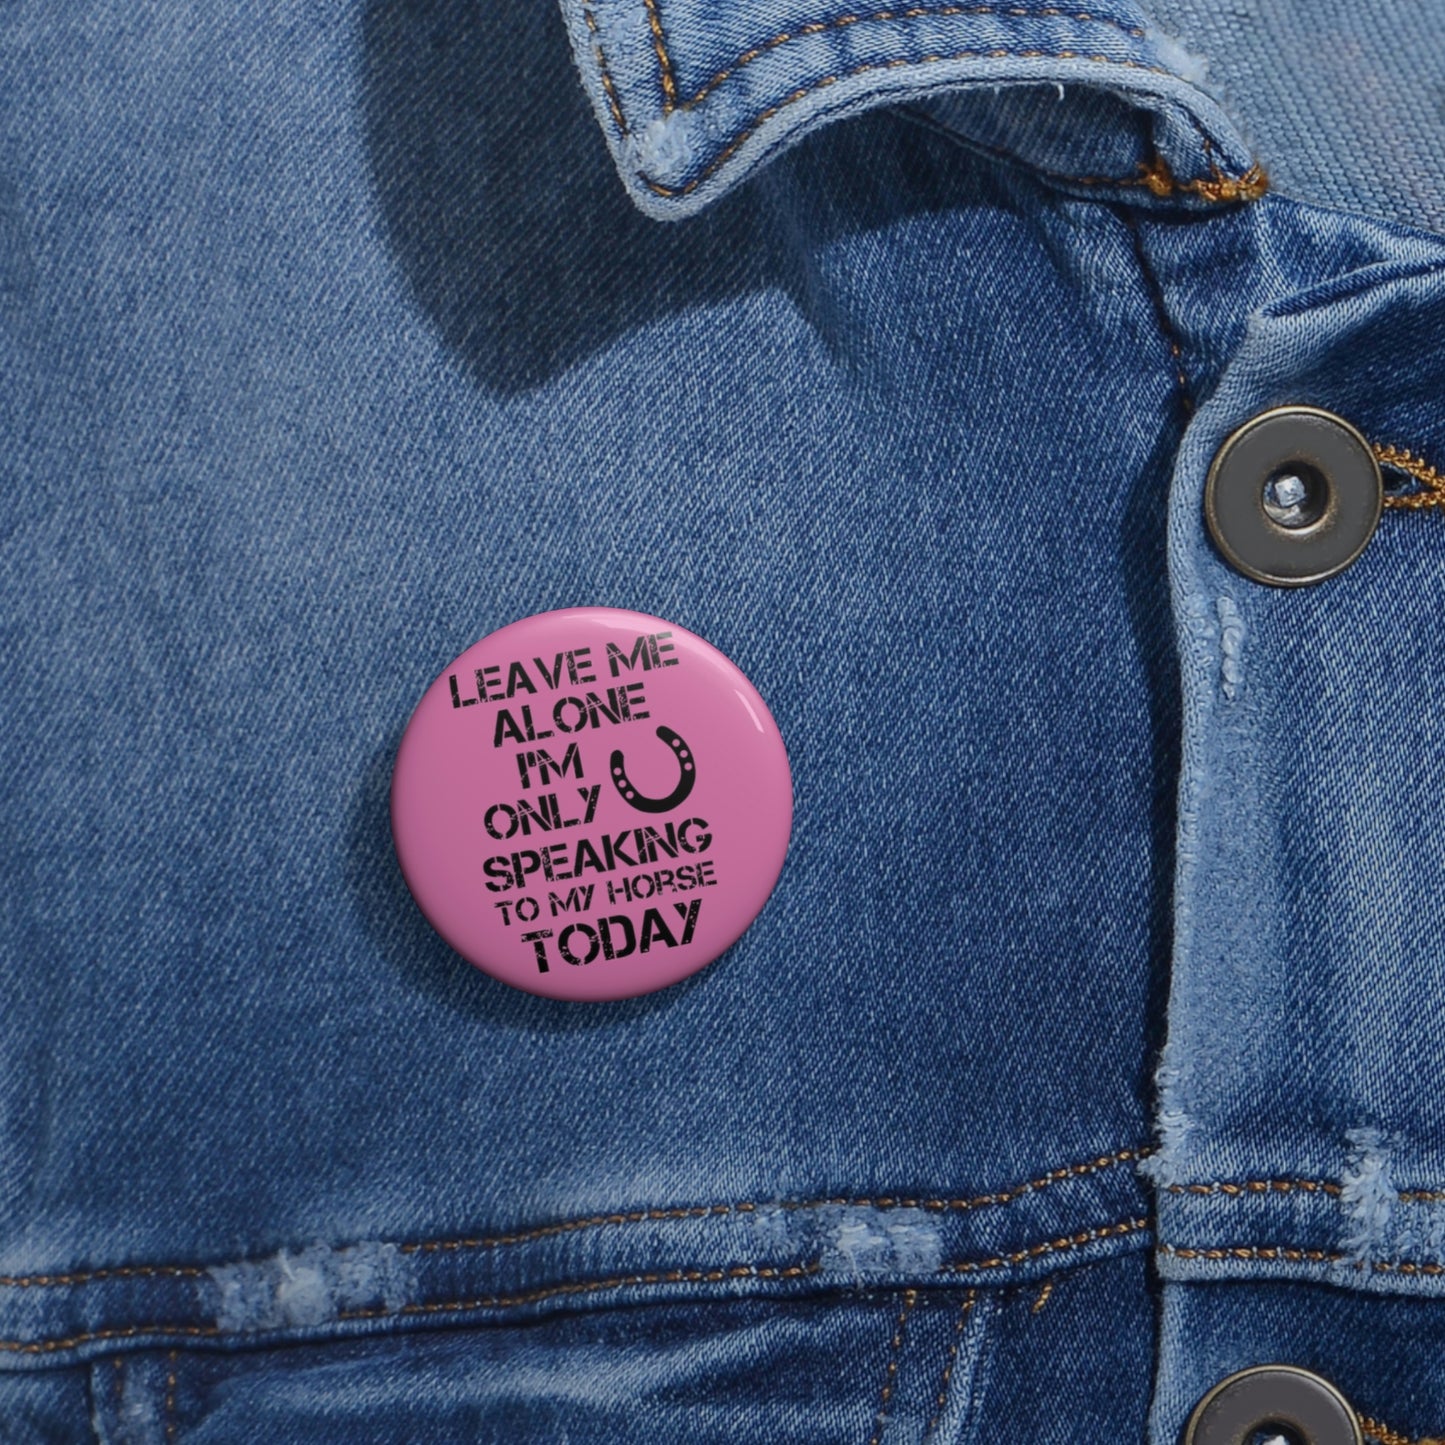 Leave Me Alone - Custom Pin Buttons - Pink / Black